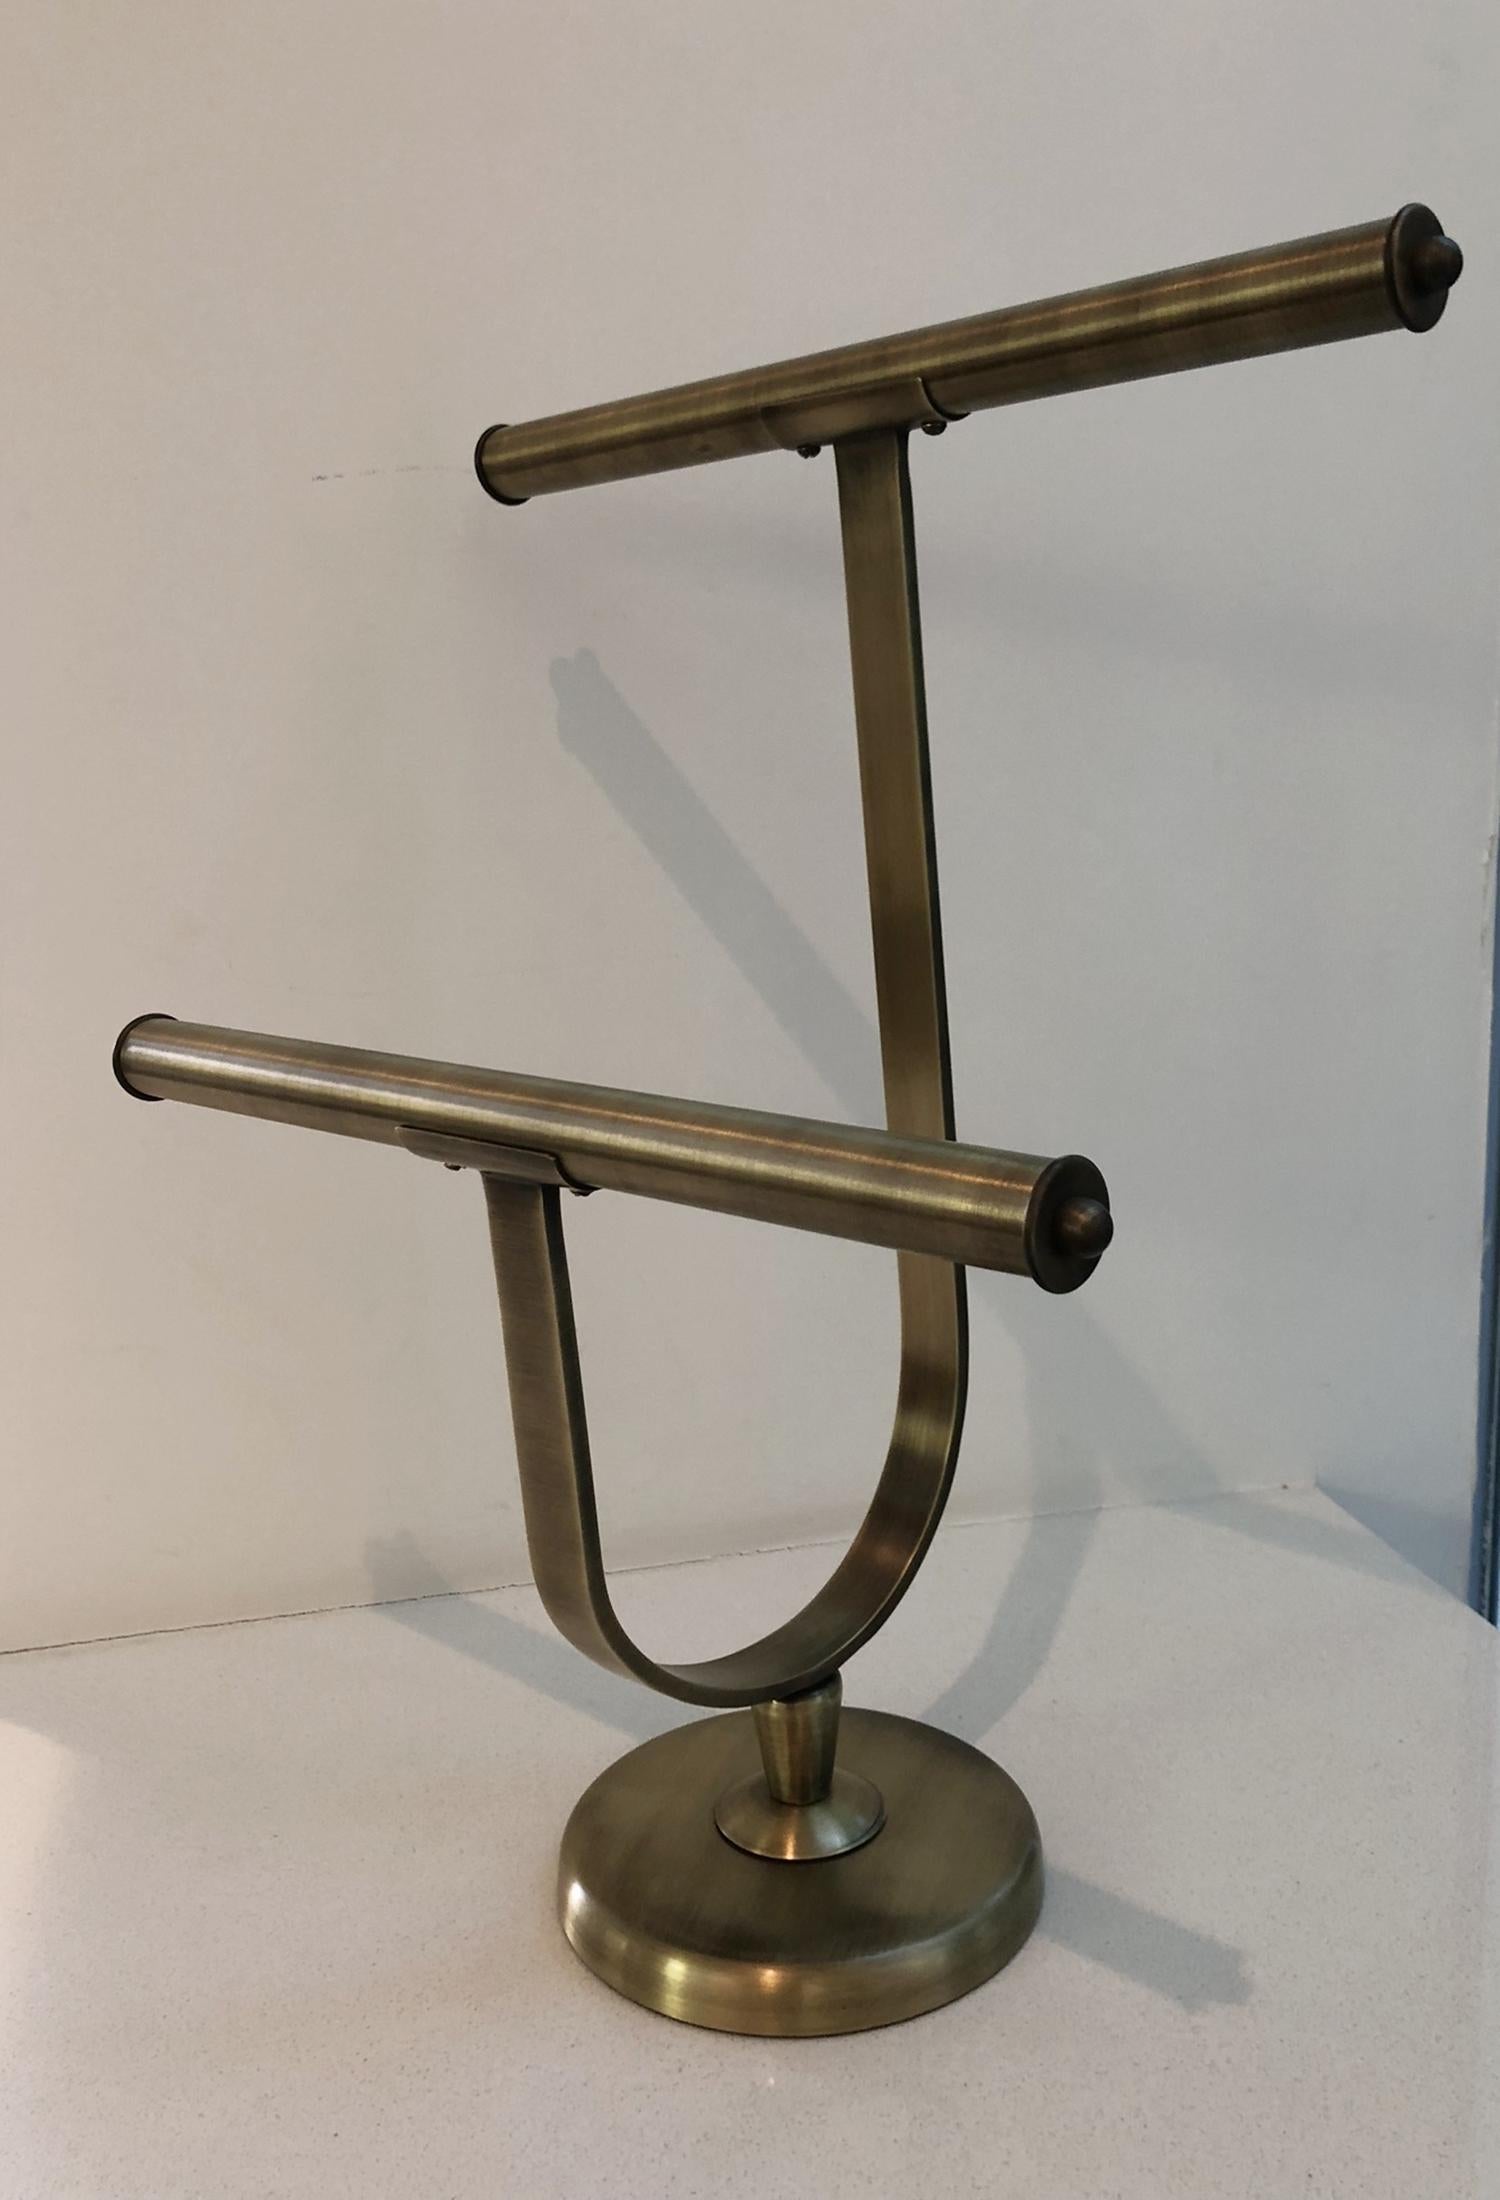 Vintage Brass Jewelry or Tie Holder by Charles Hollis Jones For Sale 1